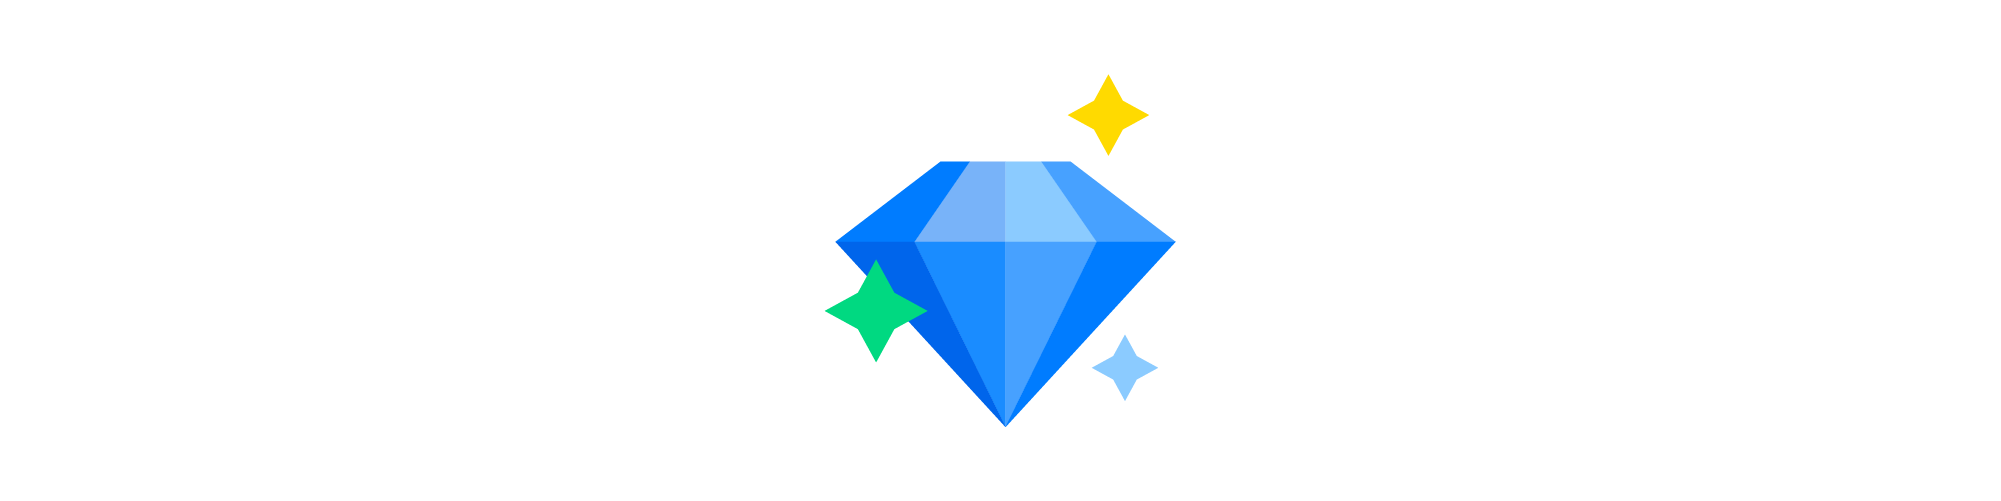 Illustrated icon of a diamond